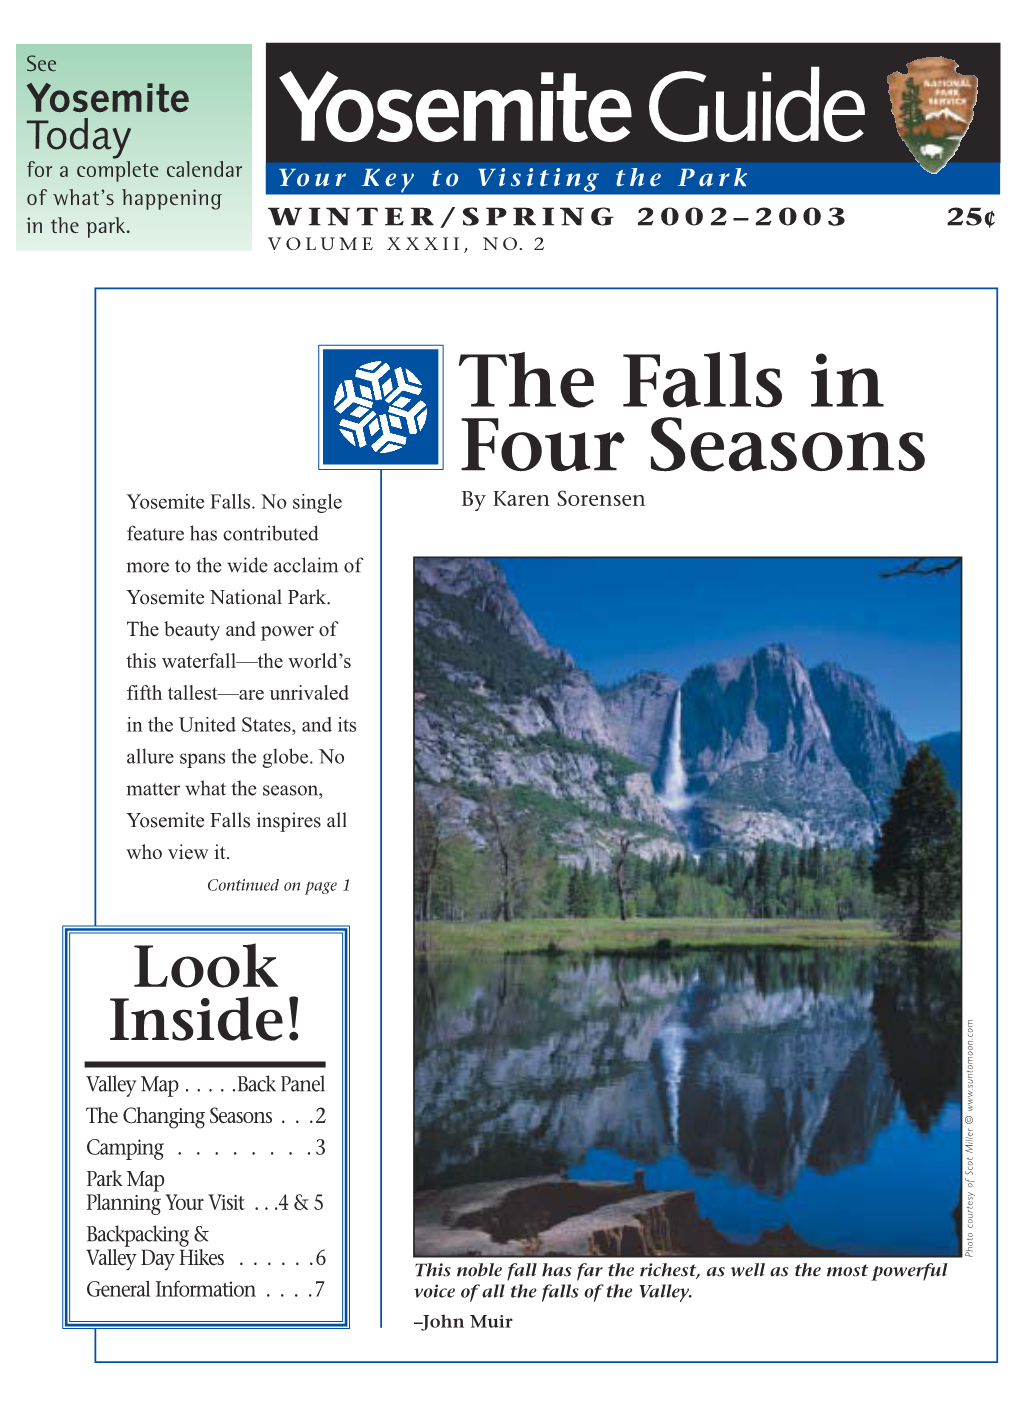 Yosemite Valley Stable, Spring Through Fall; See Page 7)